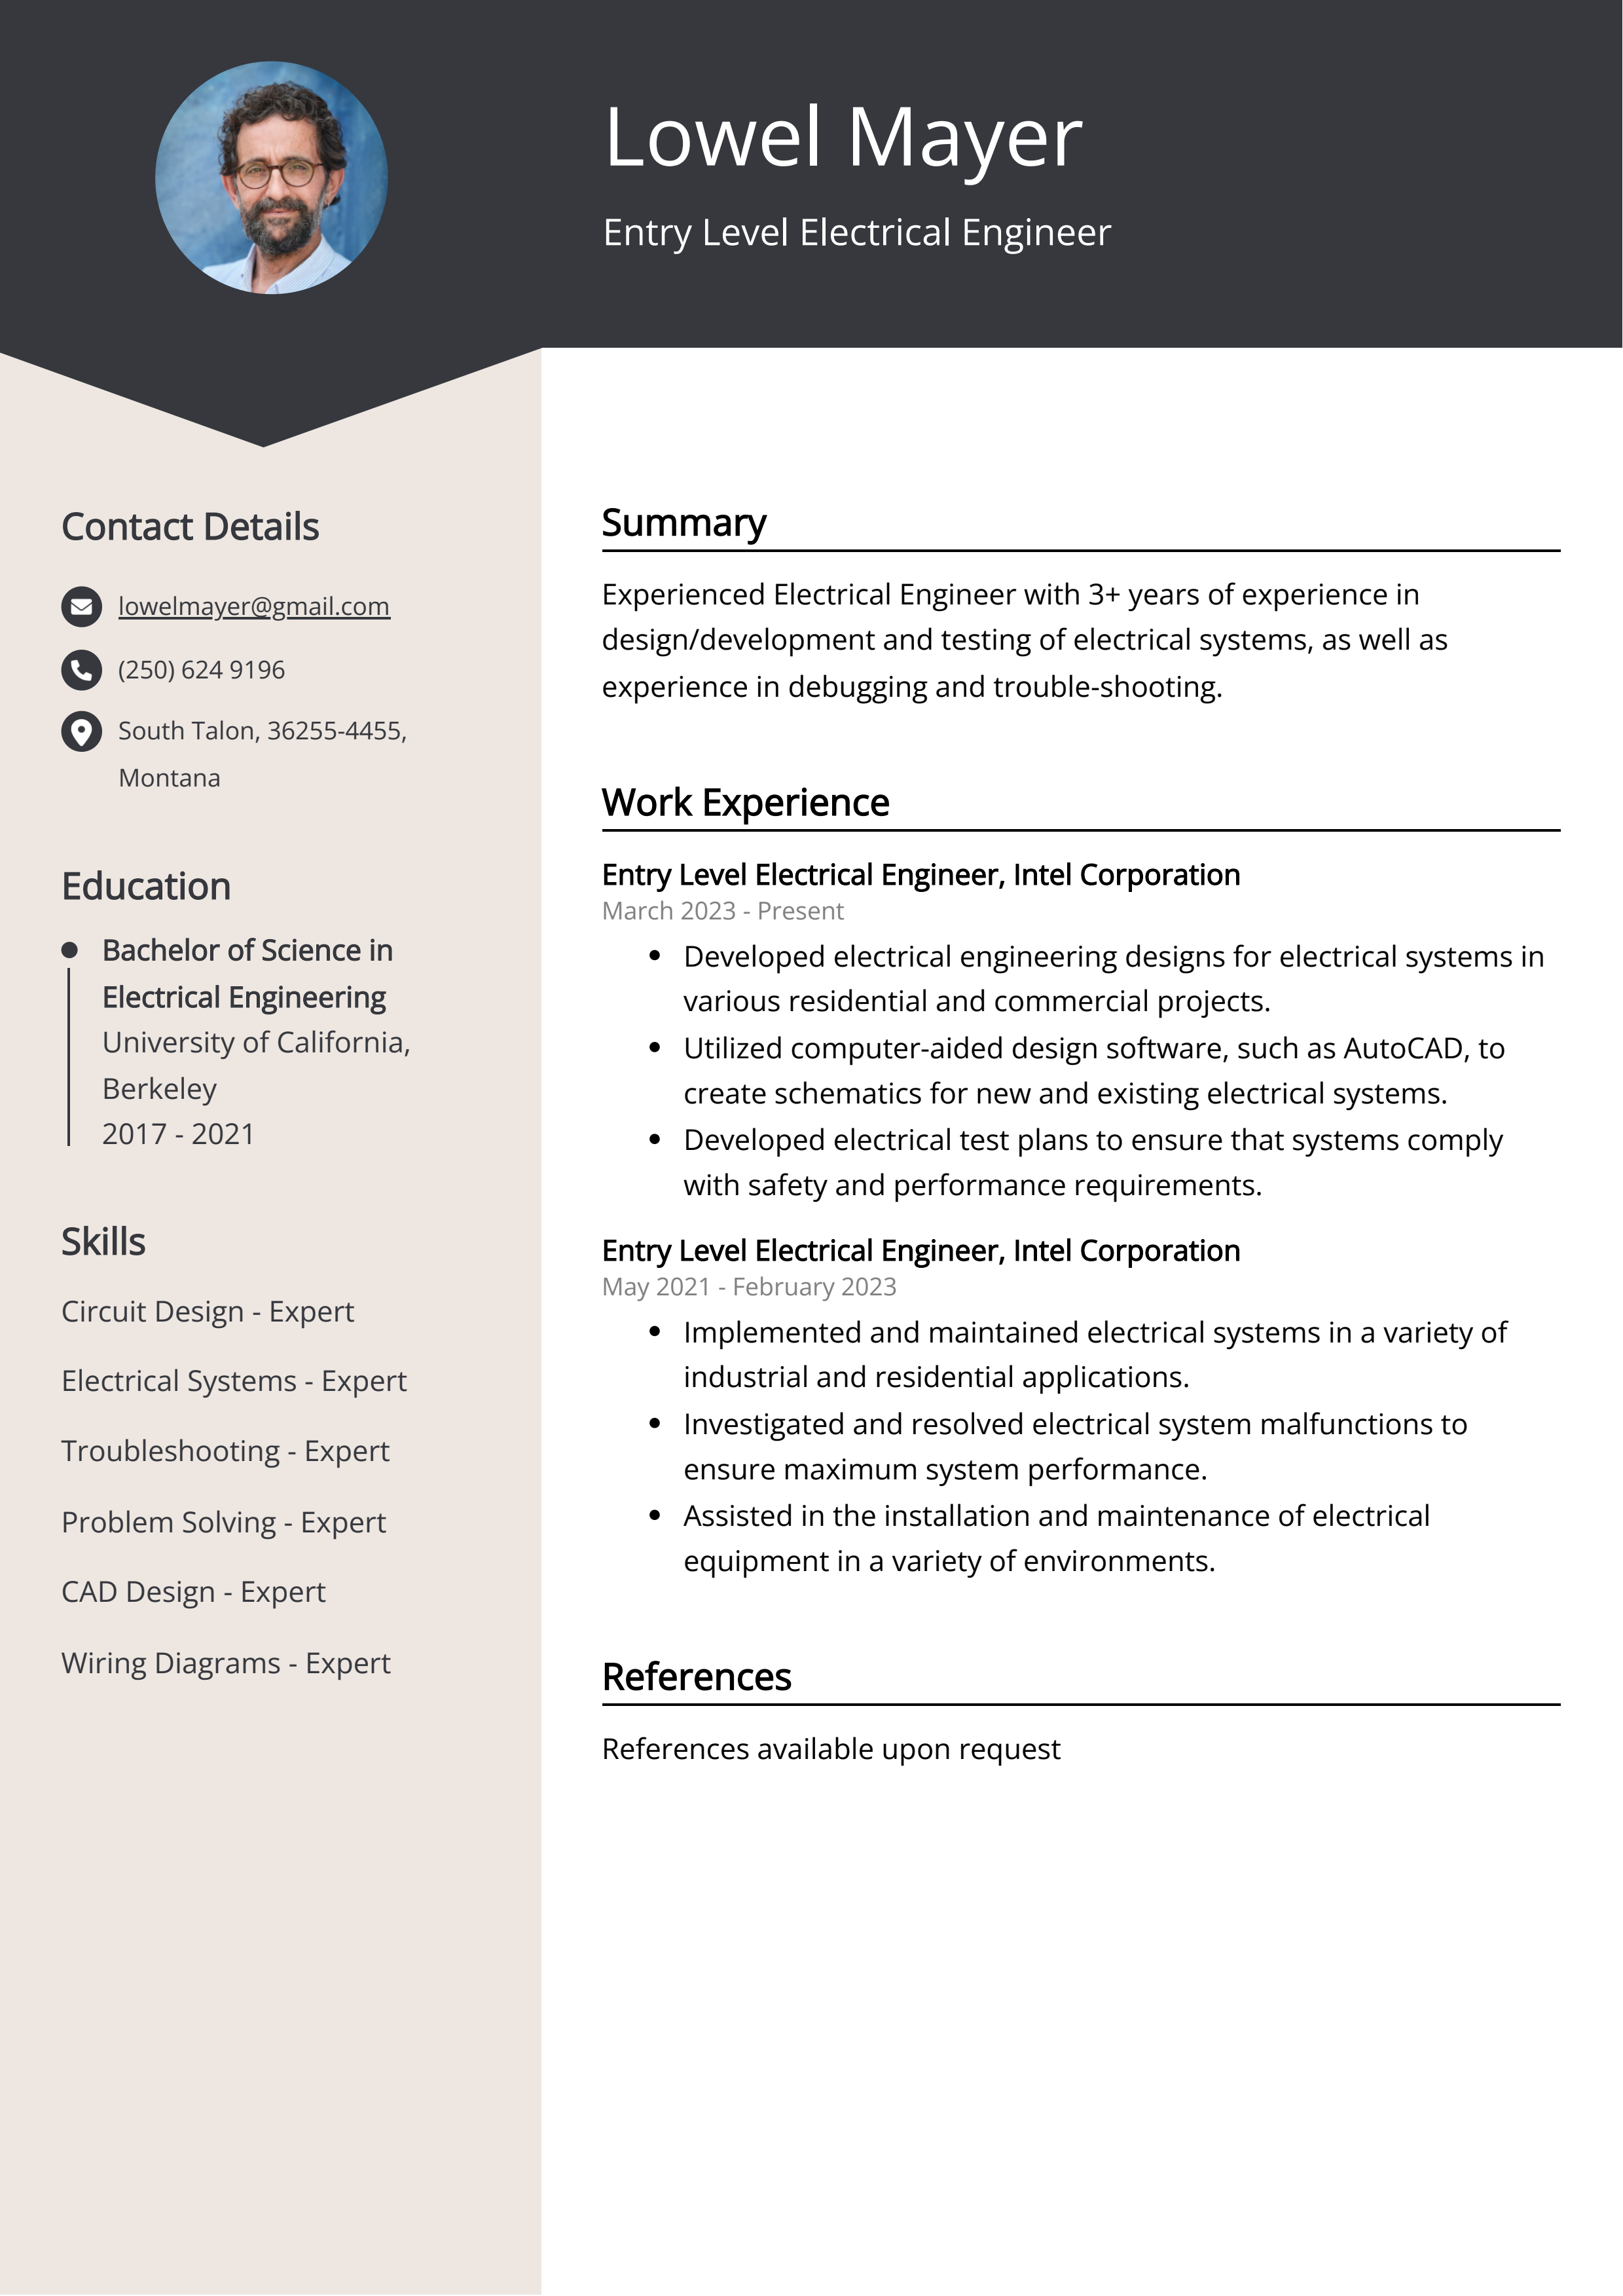 Entry Level Electrical Engineer CV Example